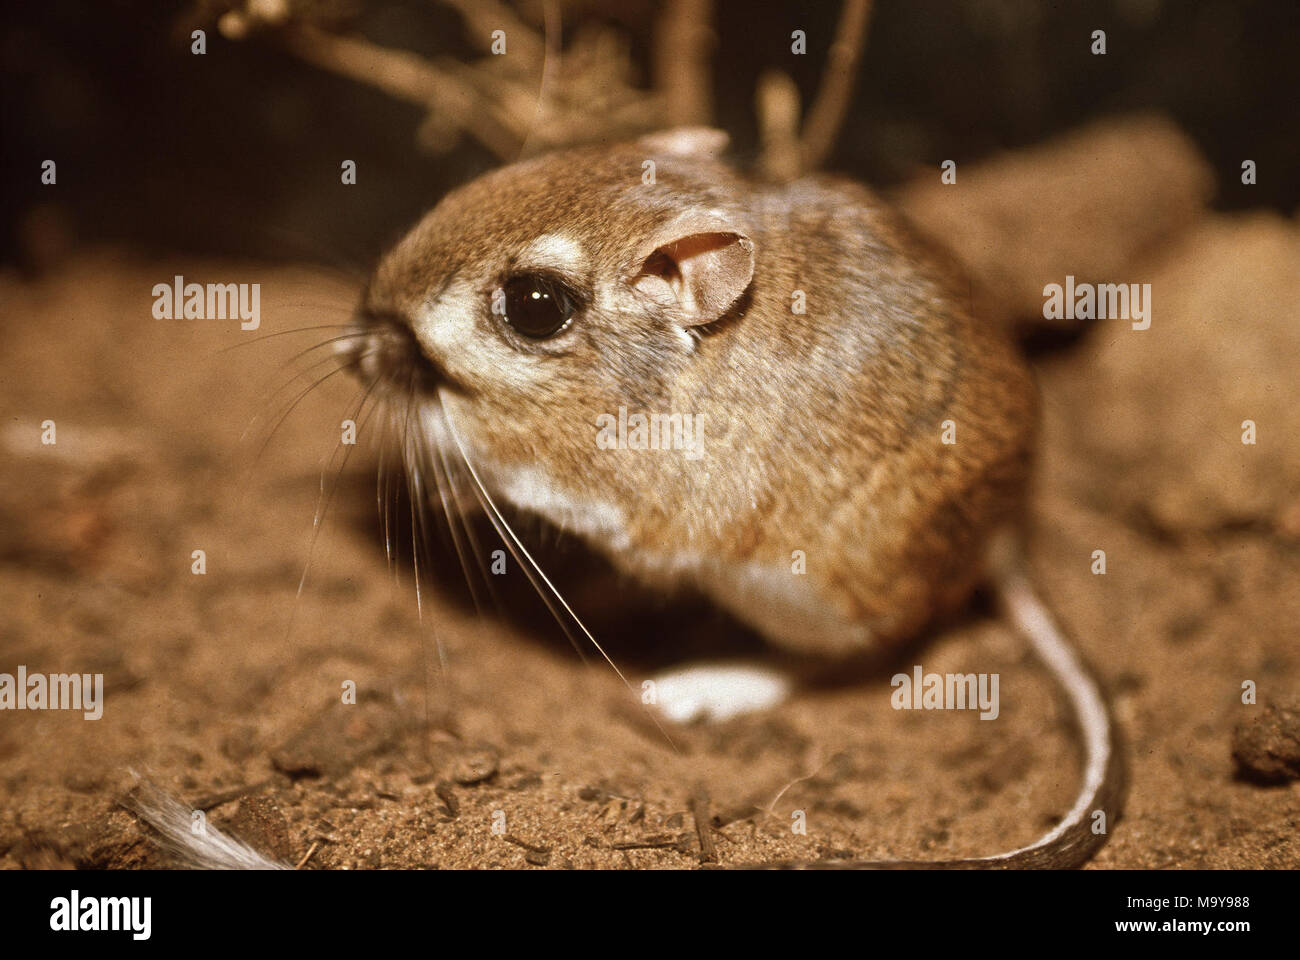 Federally endangered Morro bay kangaroo rat, last documented in the. The Morro Bay kangaroo rat, a tiny native mammal endemic to the vicinity of Los Osos in western San Luis Obispo County.  This federally endangered animal has not been sighted in three decades, but some biologist believe a few colonies may still persist in the area. Stock Photo